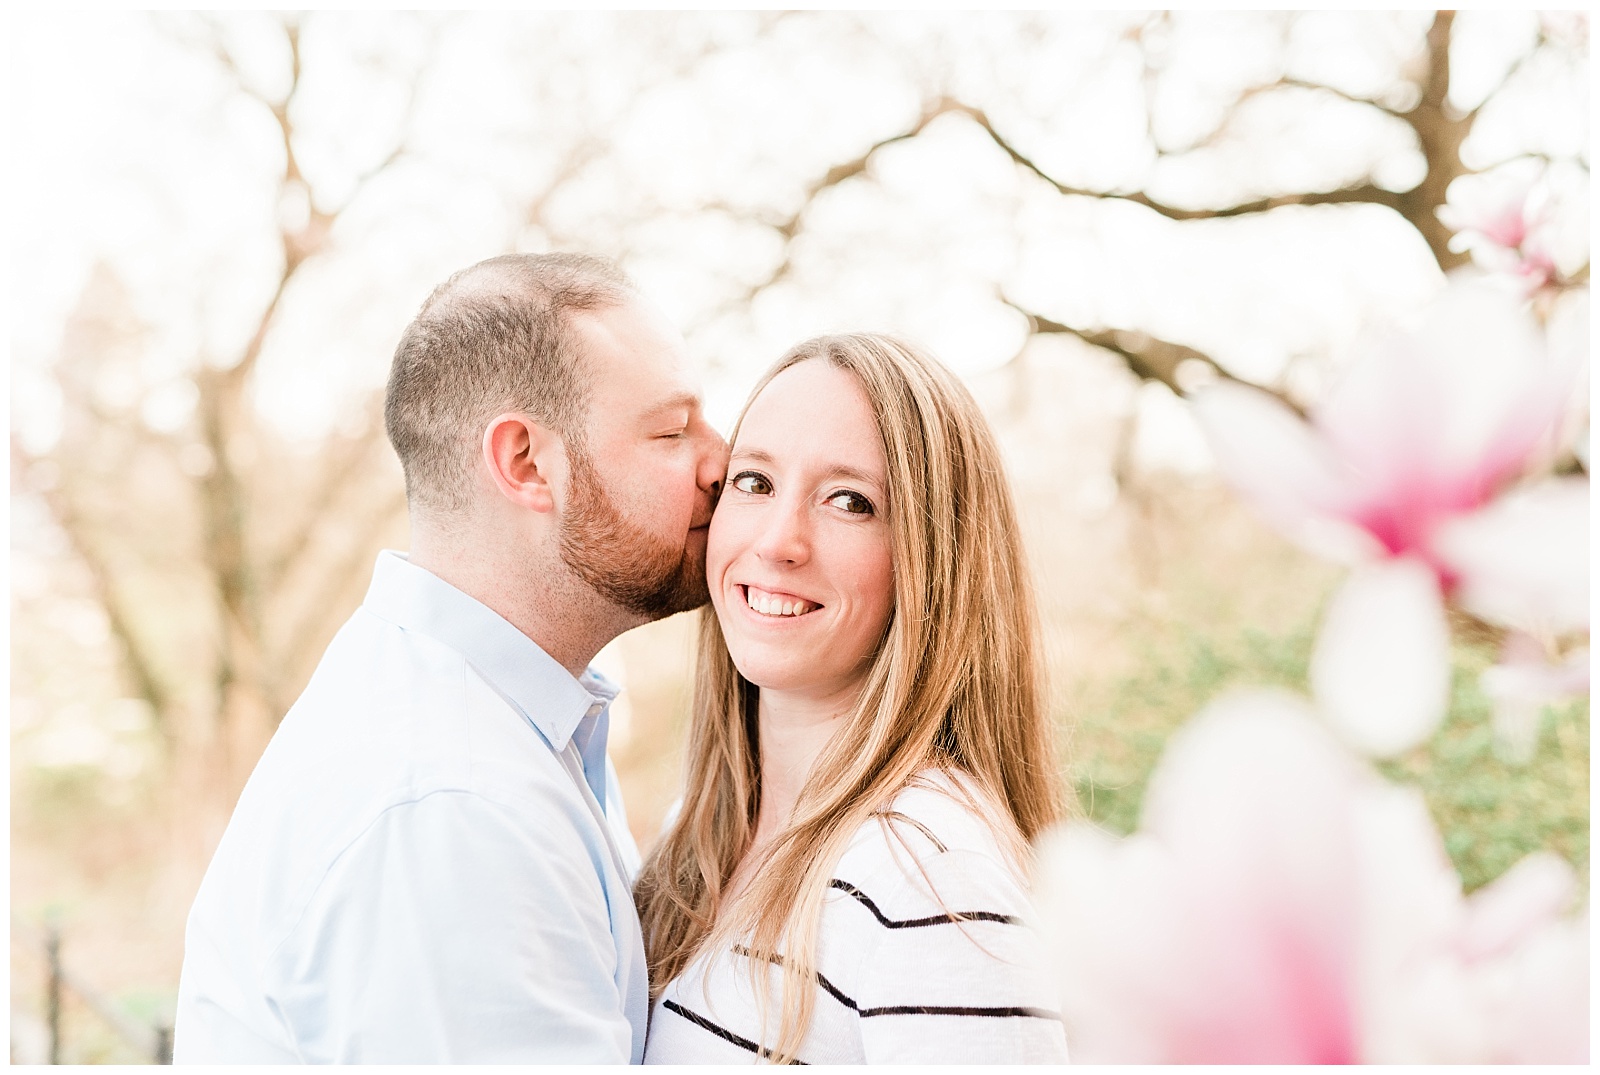 Central Park, NYC engagement session, springtime, wedding photographer, New York, blossom, blooms